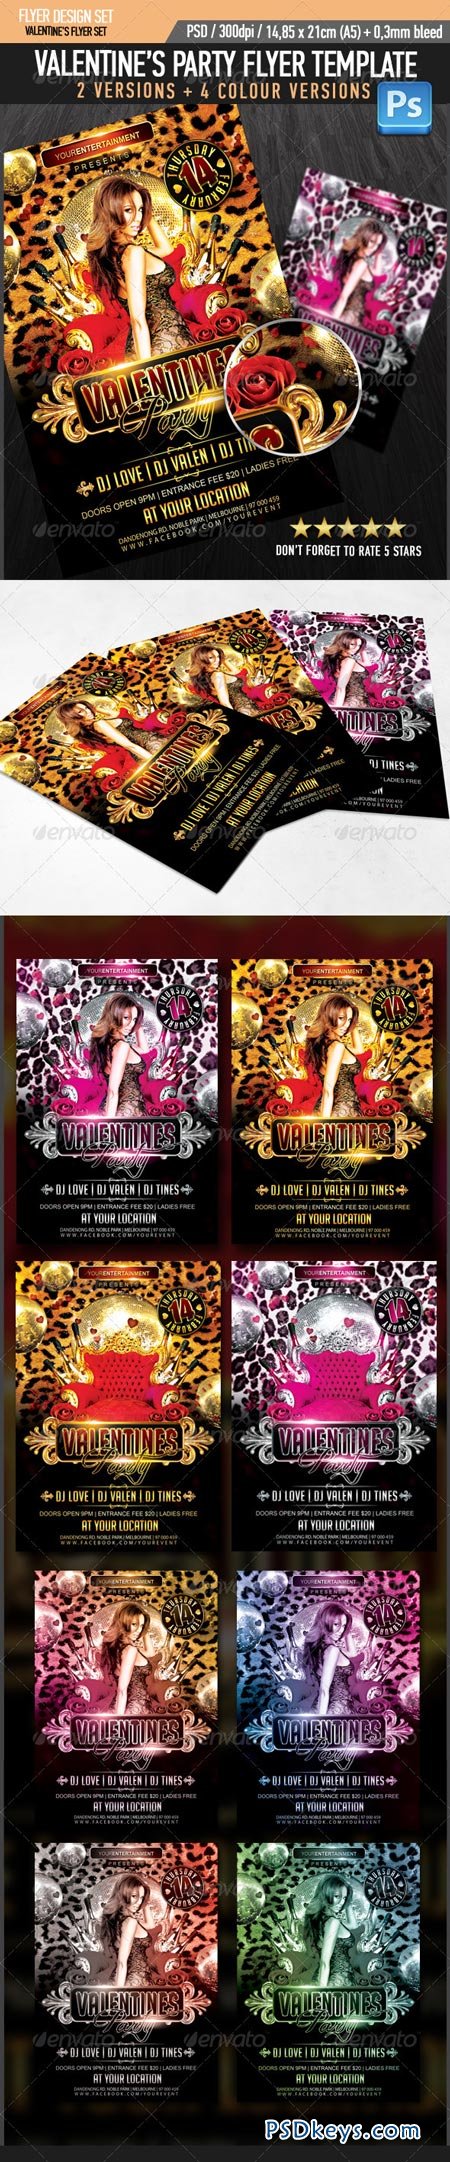 Valentine's Party Flyer Template 3808556